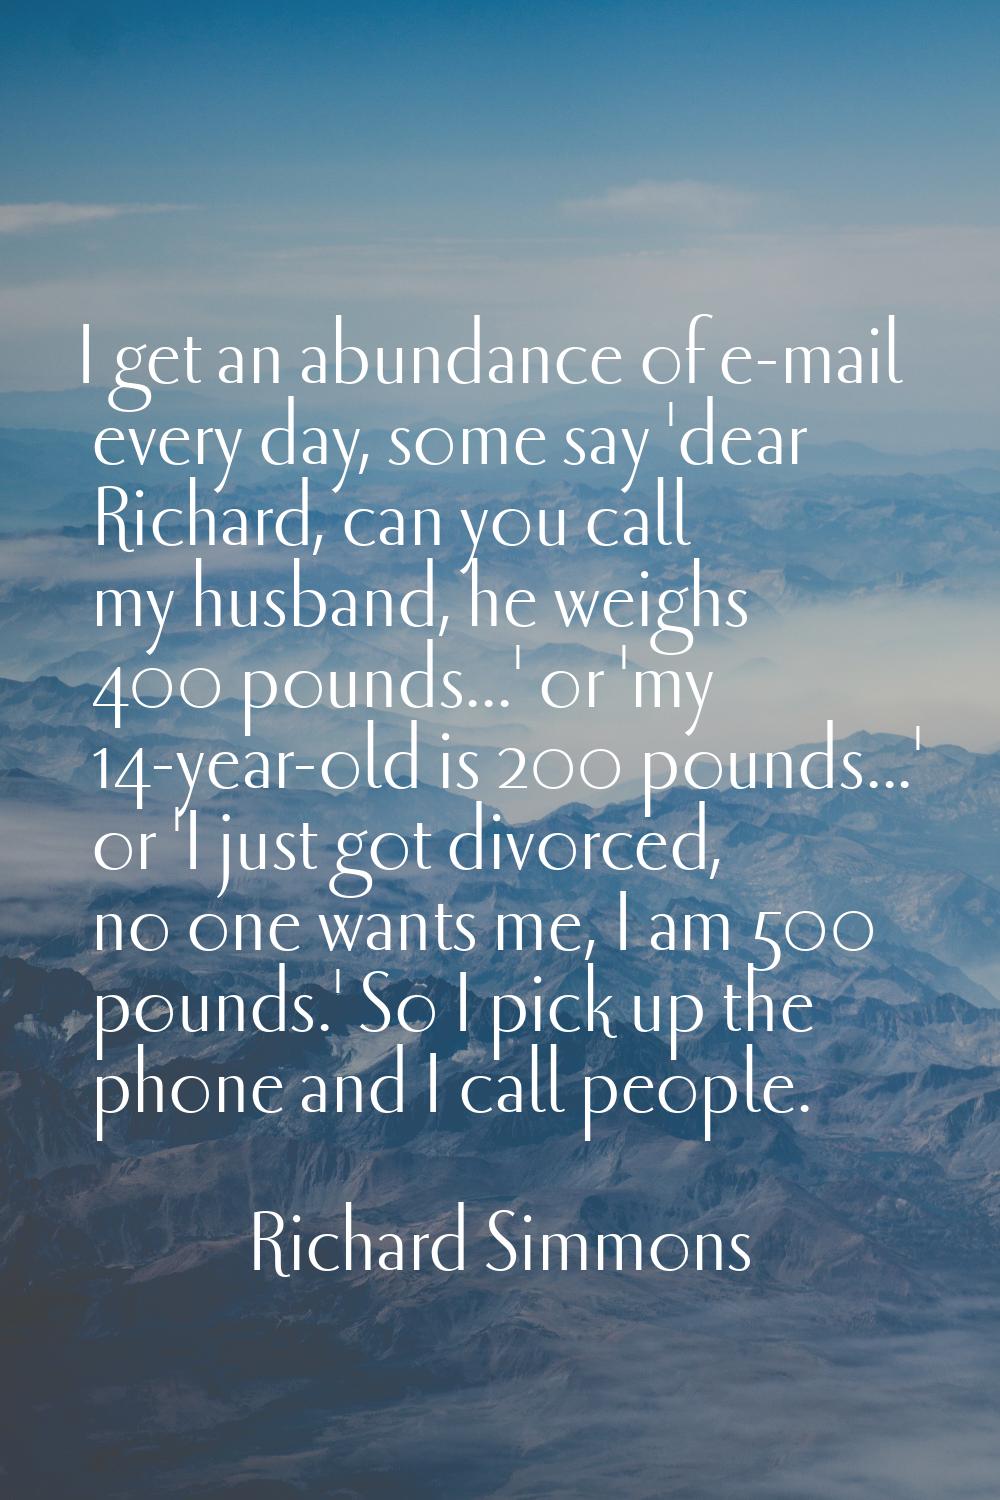 I get an abundance of e-mail every day, some say 'dear Richard, can you call my husband, he weighs 